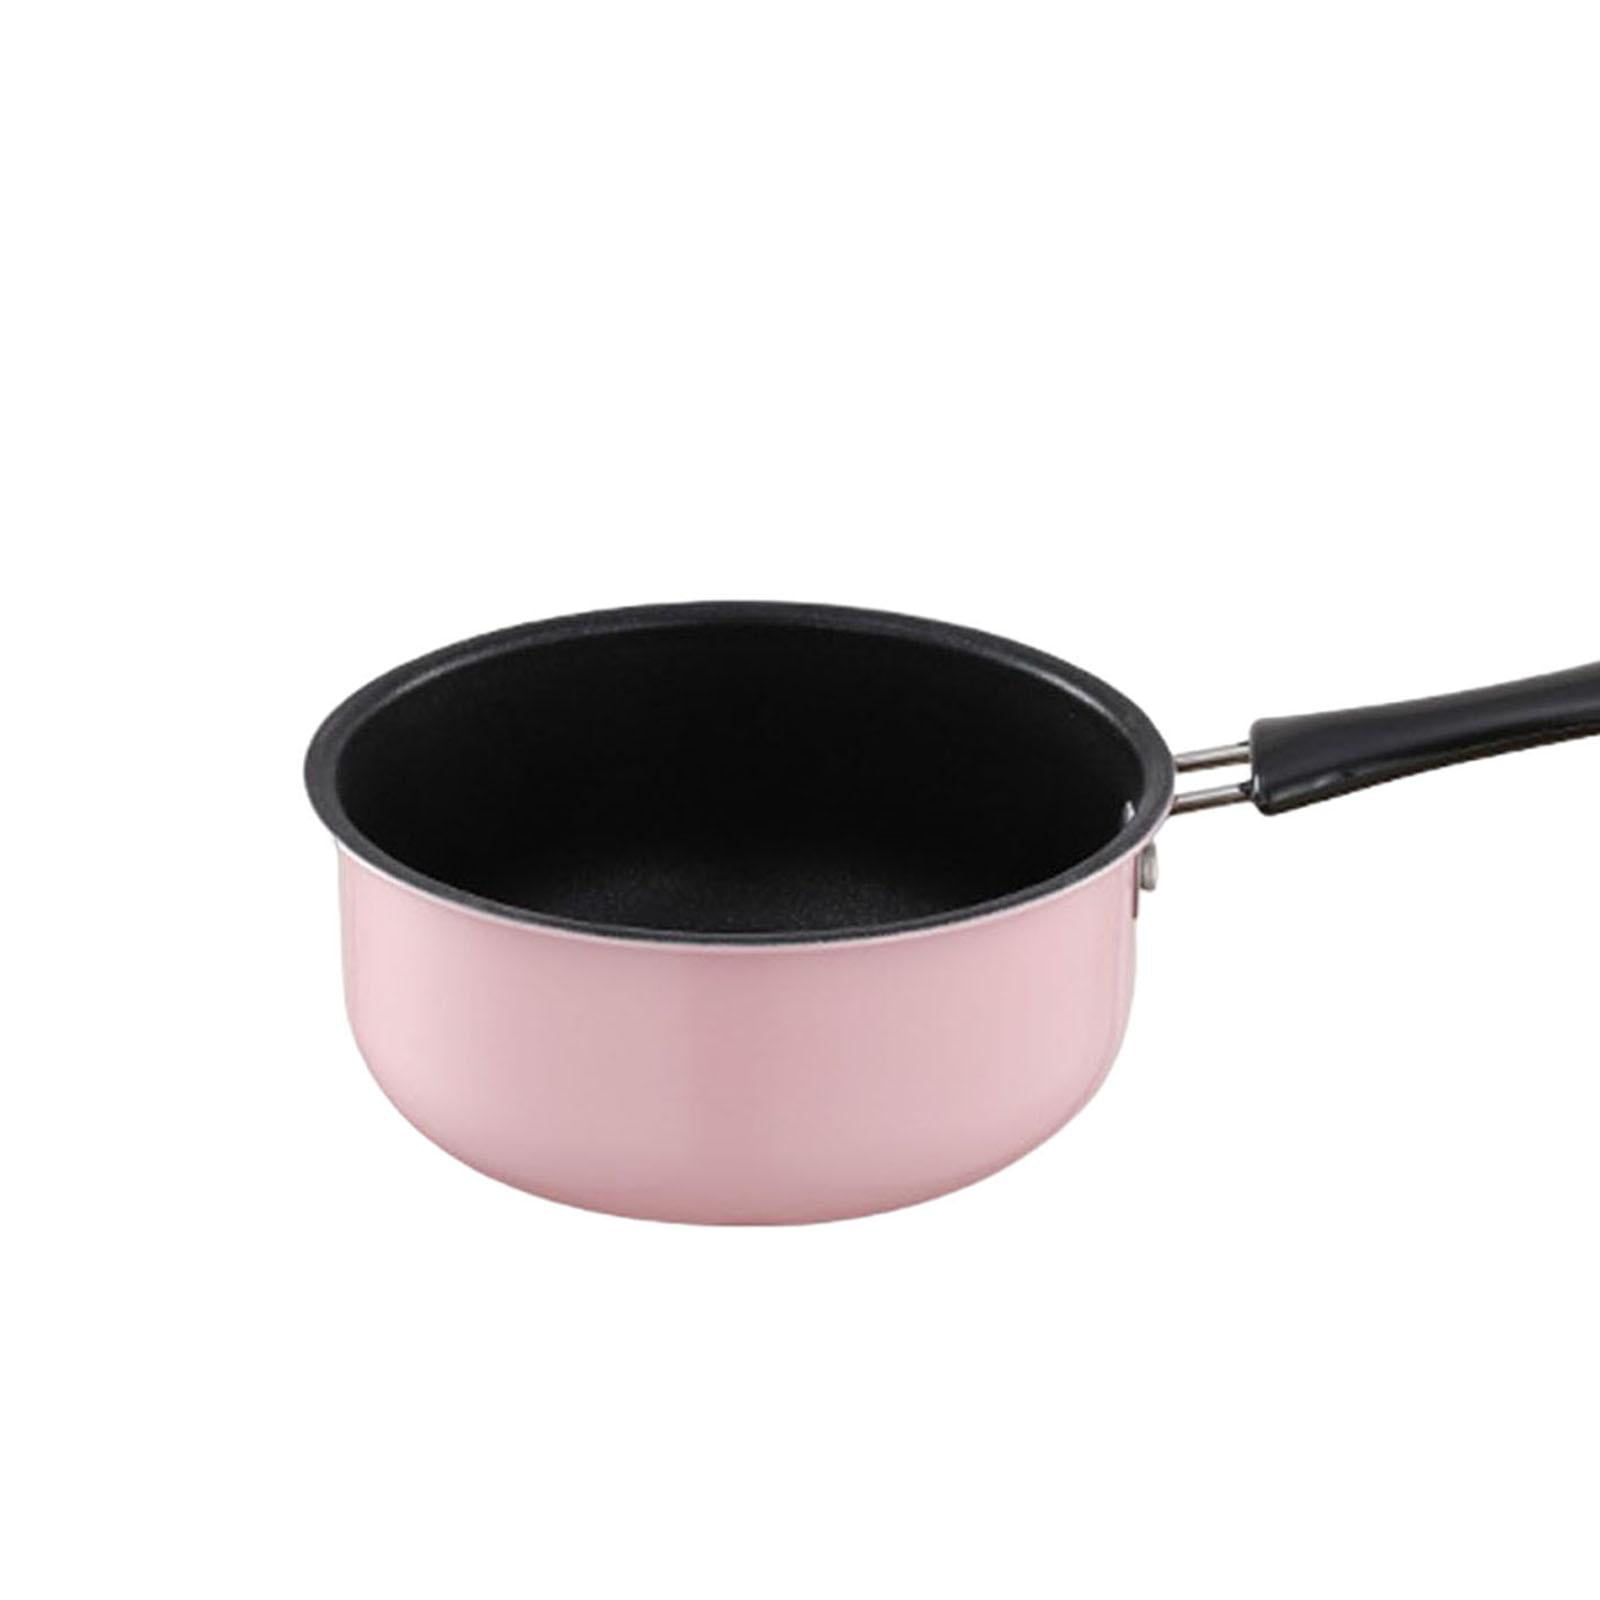 Yardwe Milk Pot Stainless Steel Saucepan with Lid Butter Warmer Nonstick  Milk Warmer Small Cookware Butter Pan Coffee Pot for Home Kithen Food  Heating 20cm price in Saudi Arabia